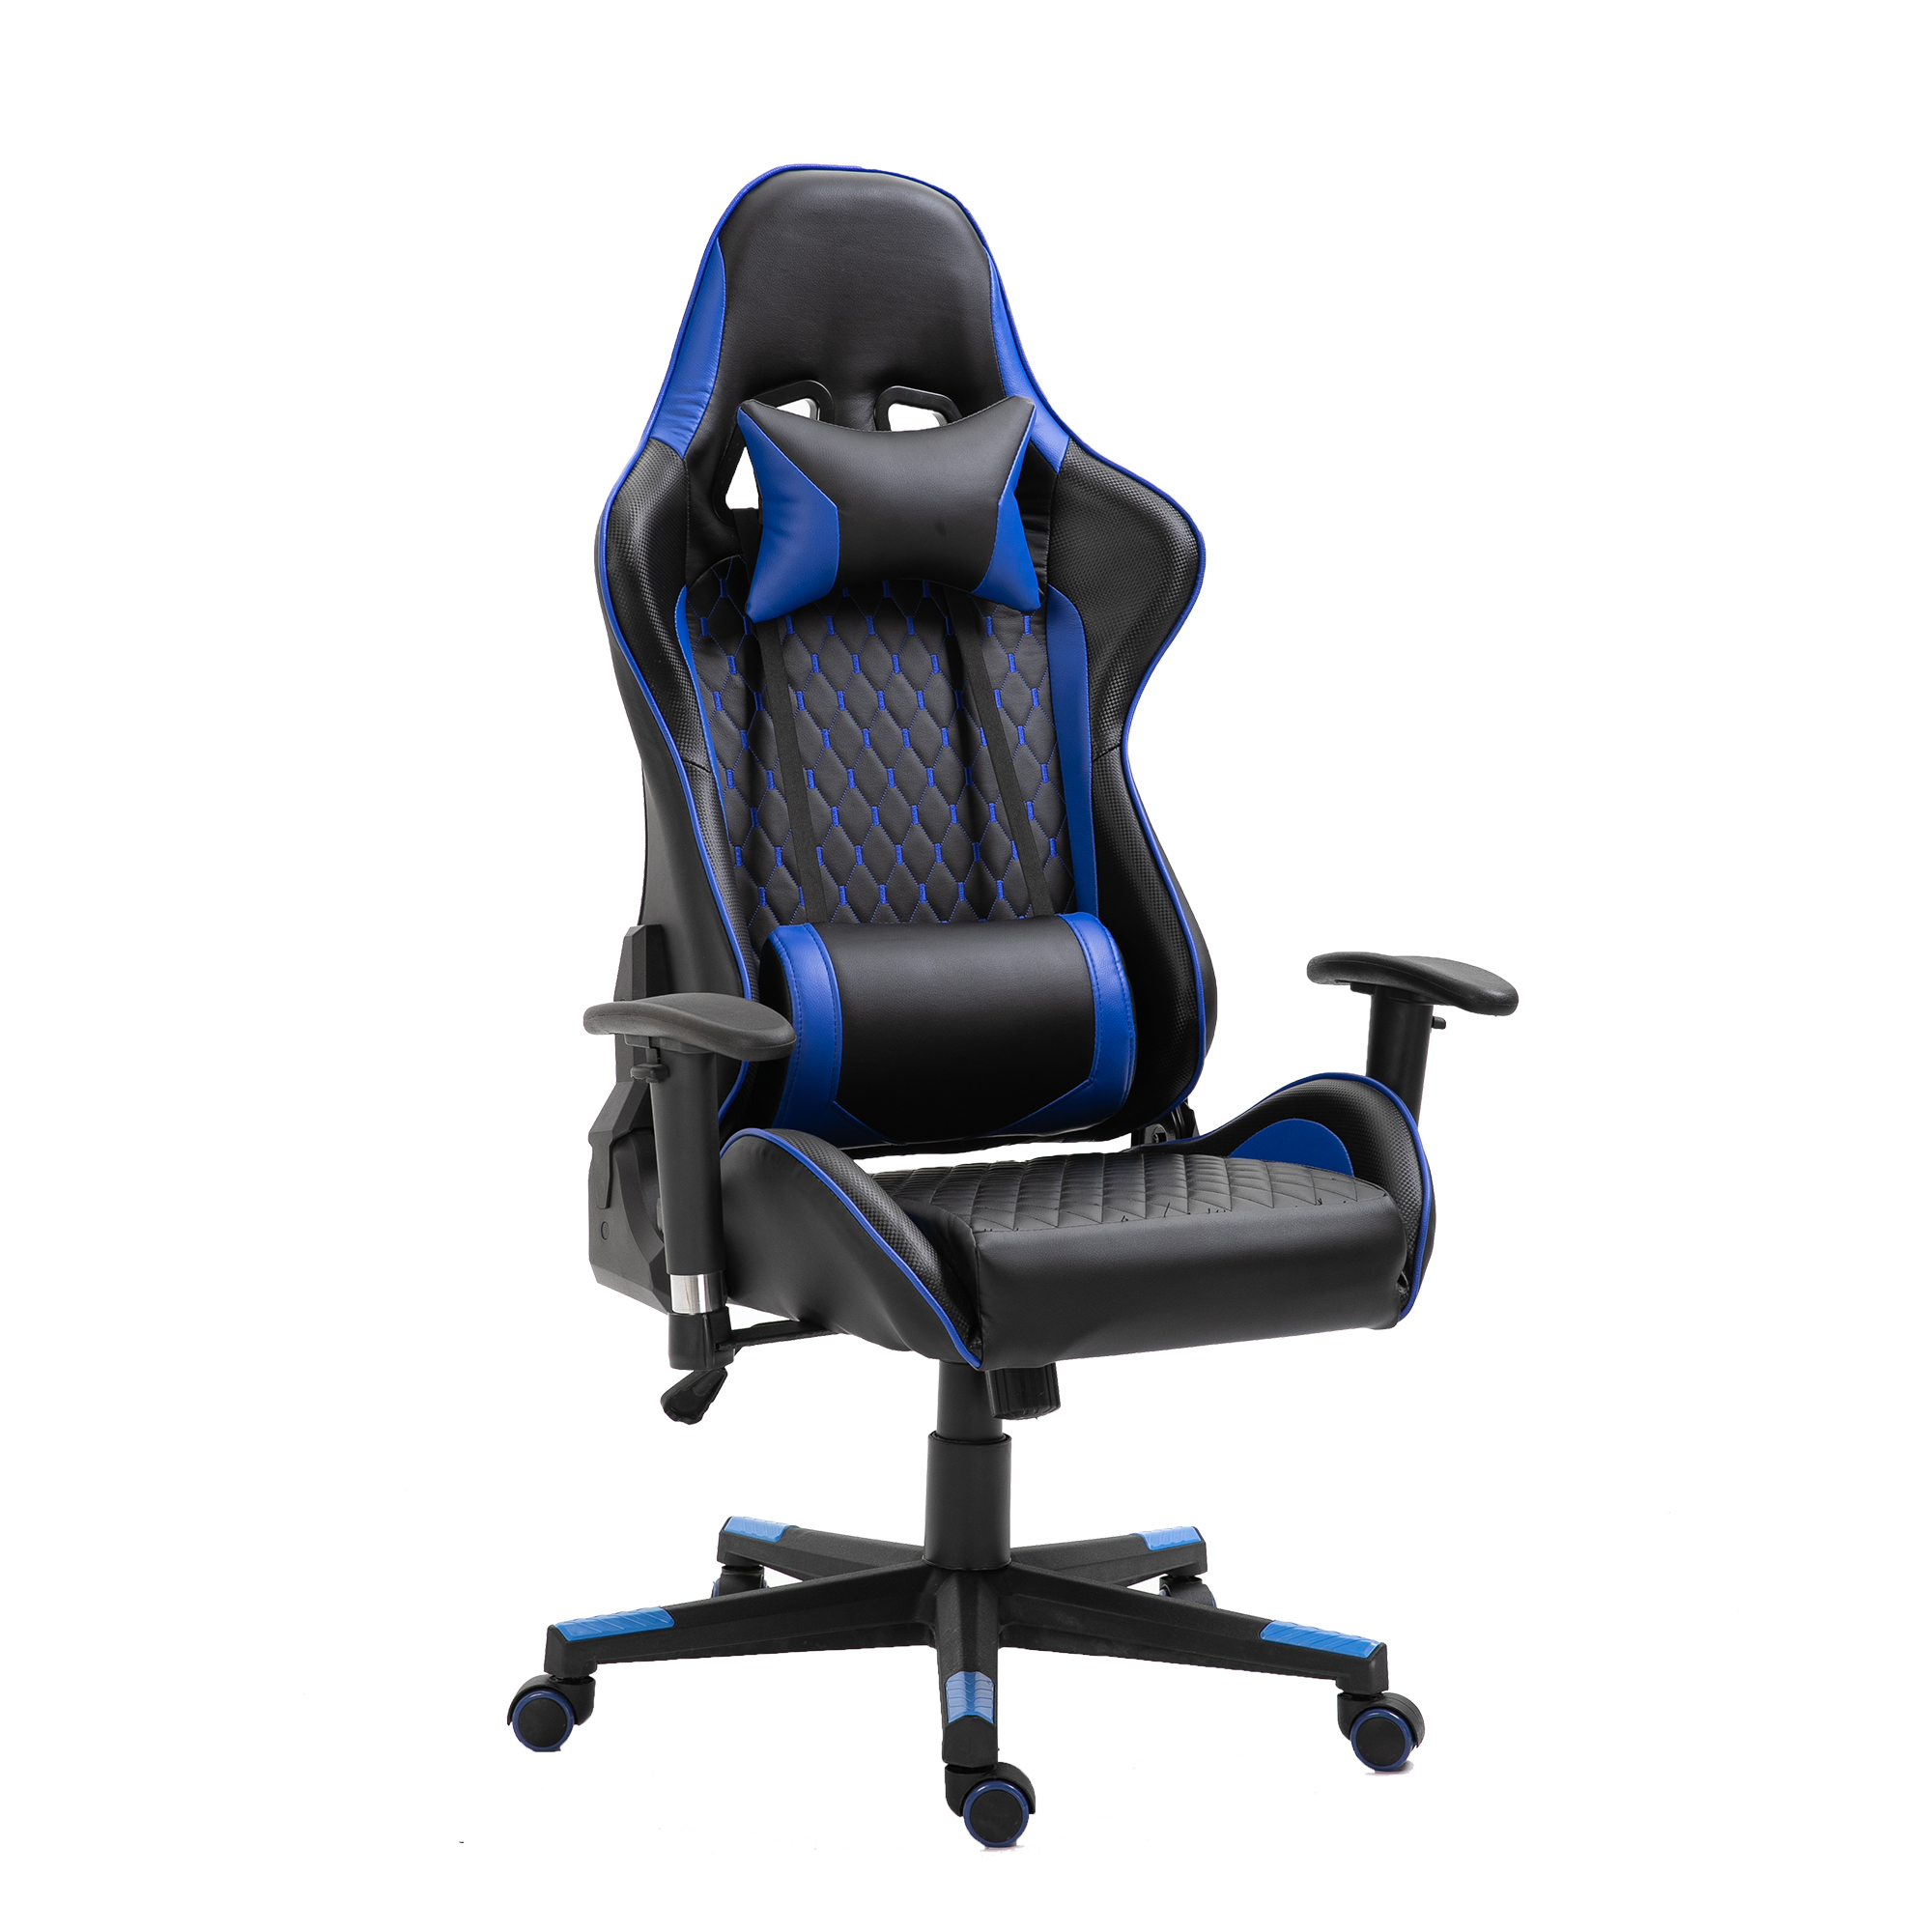 Youge wholesale linkage armrest Racing ergonomic gaming chair Featured Image